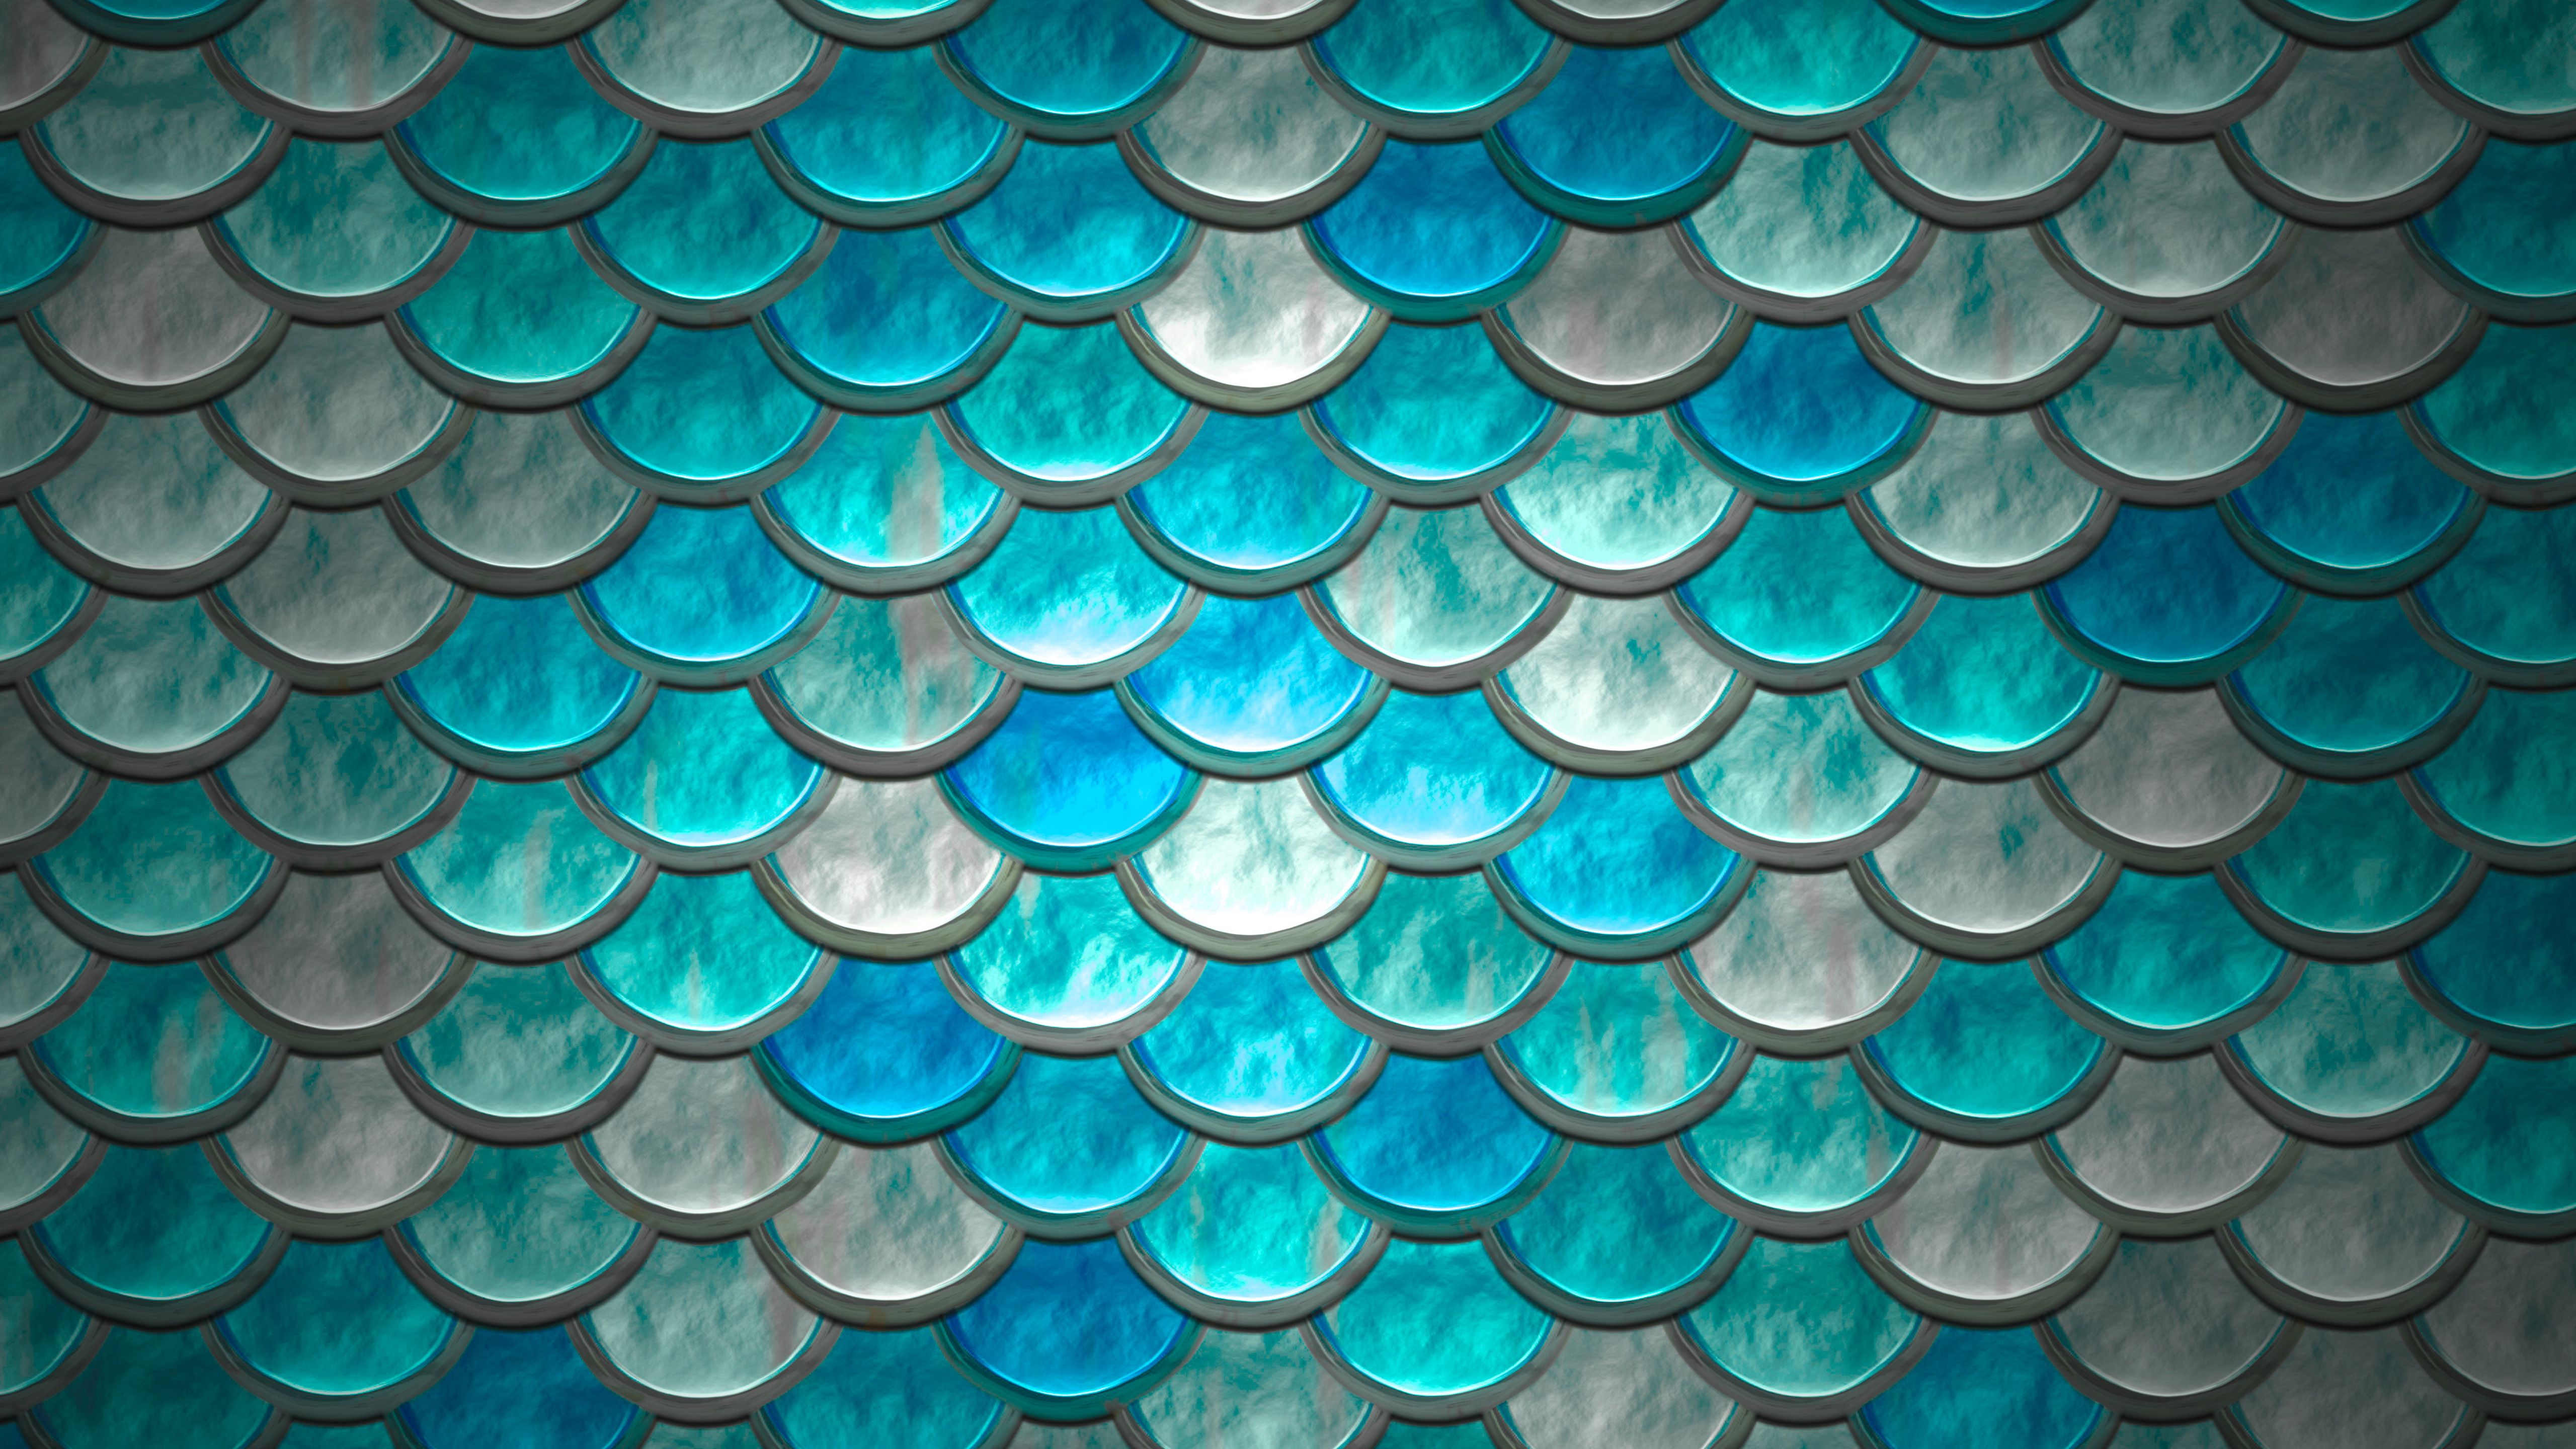 Abstract Mosaic Blue Turquoise Cyan Scales Pattern 5120x2880